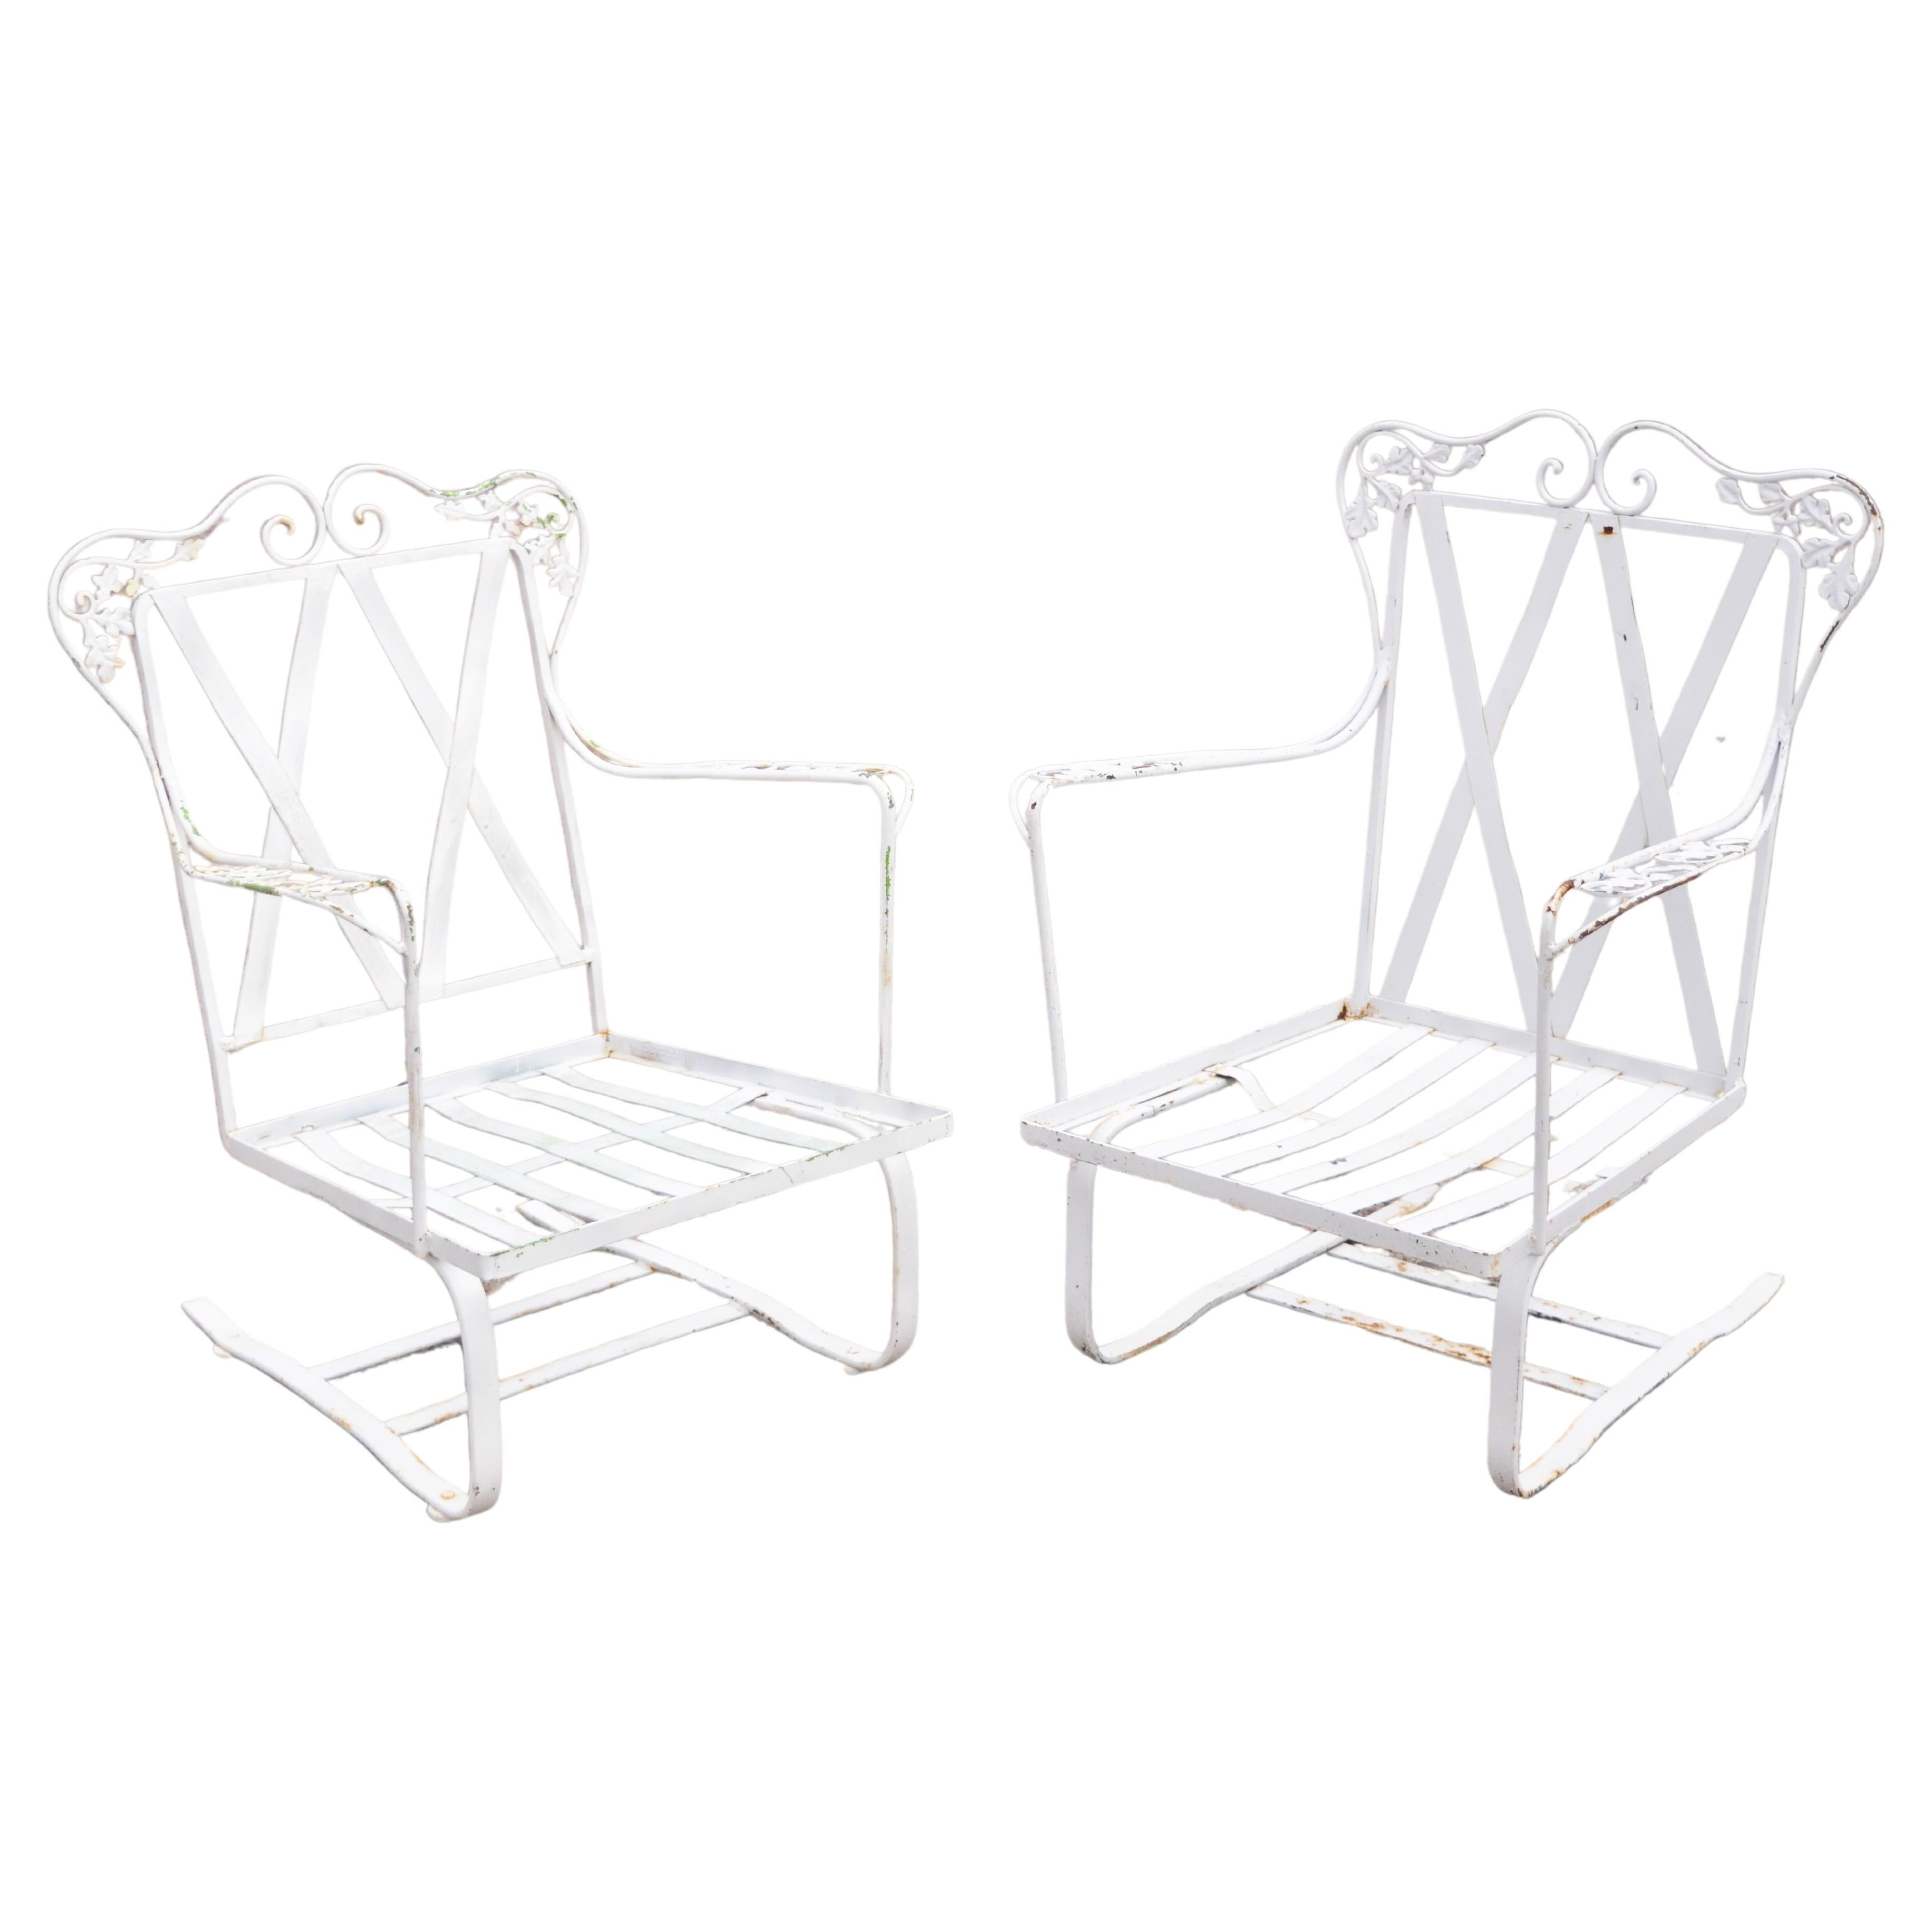 Antique Woodard Chantilly Rose Wrought Iron Patio Bouncer Lounge Chair - a Pair